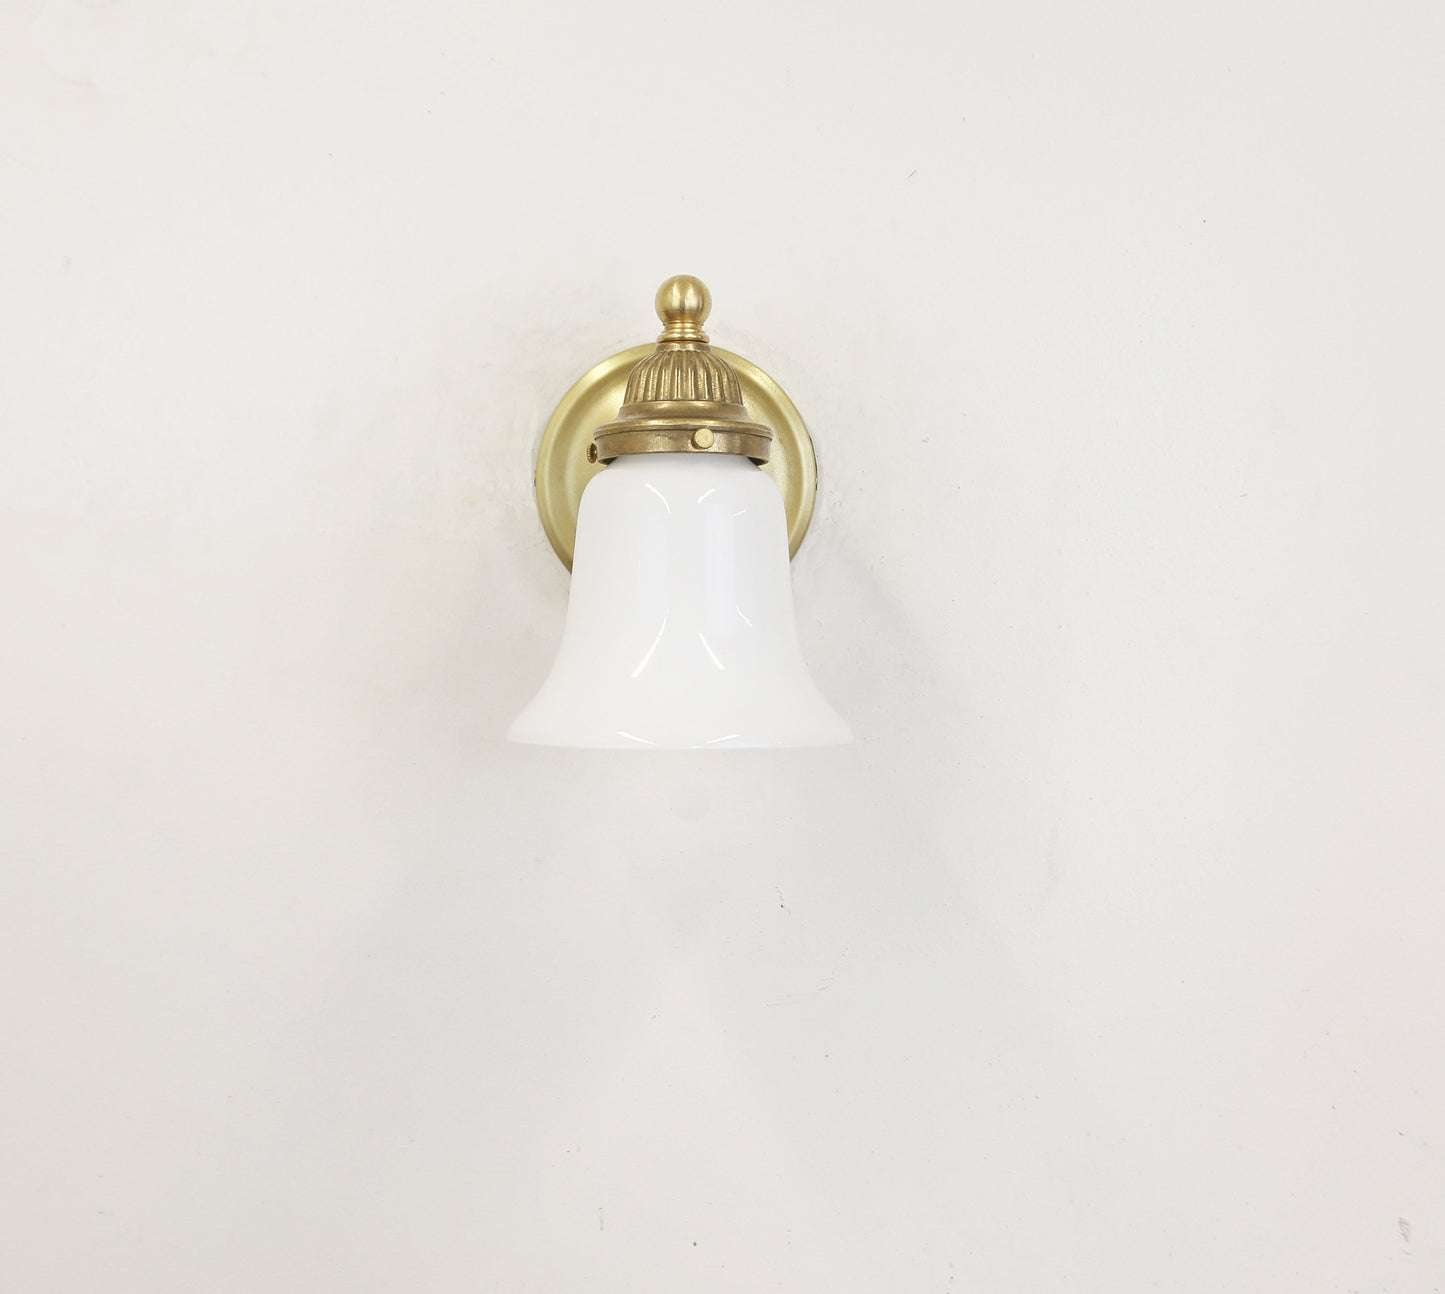 Casting Canopy Wall sconce Light, Brass Wall Sconce Light, Classic Wall Sconce Light